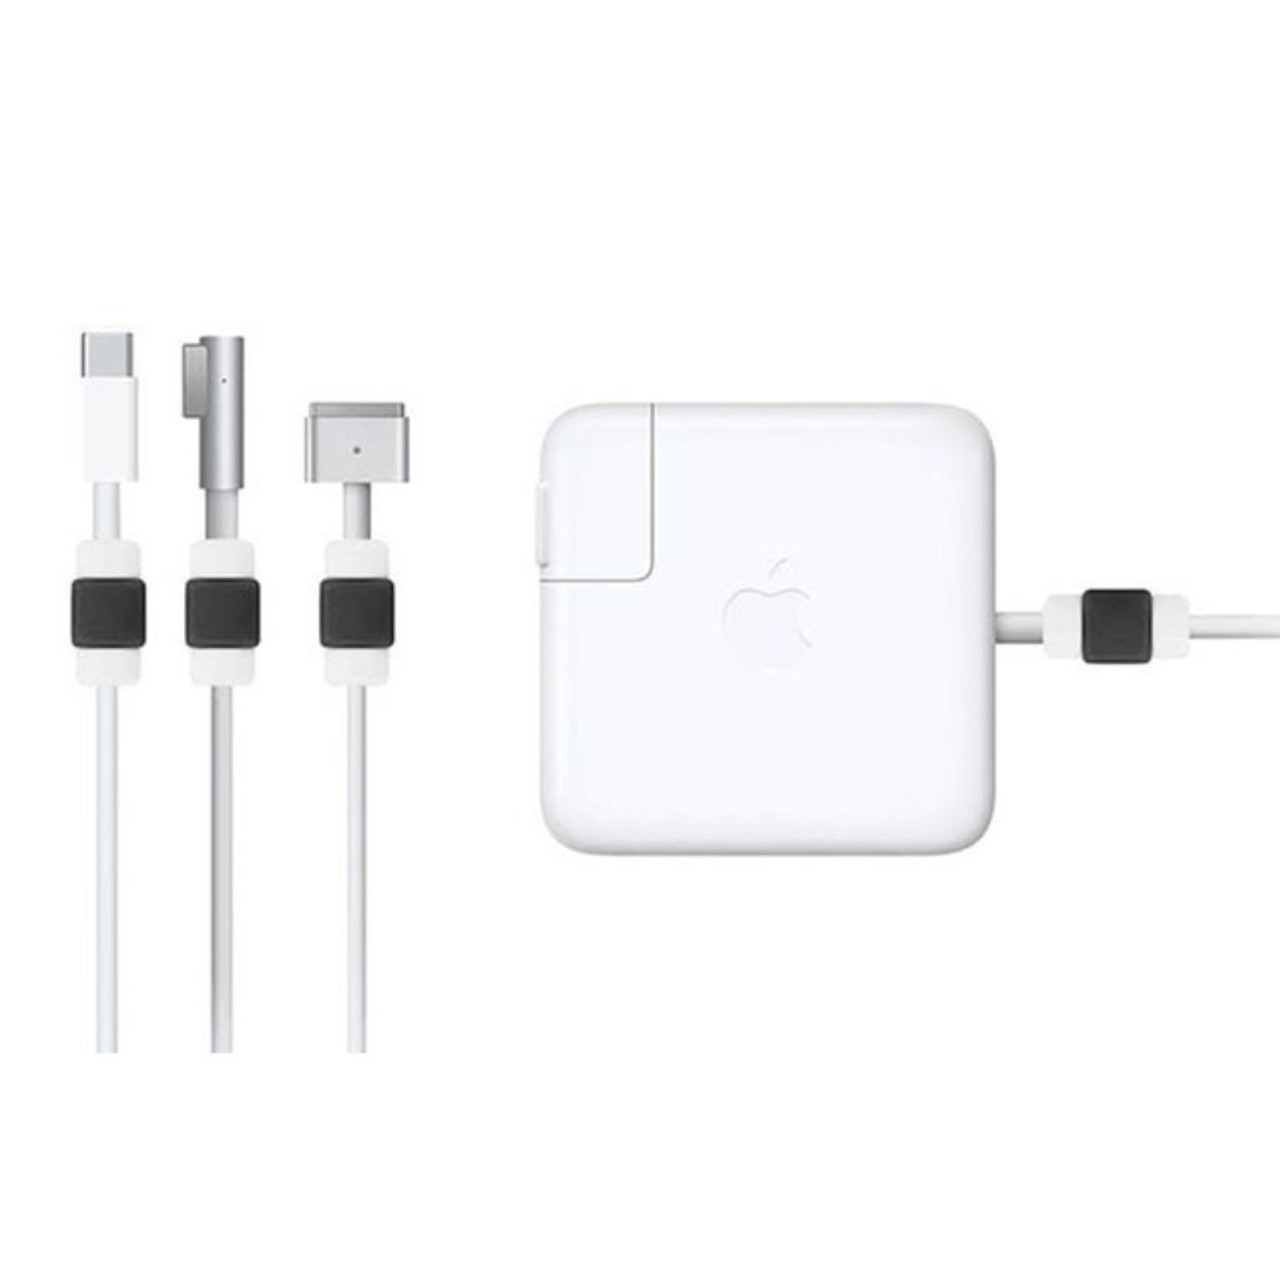 Cable Protectors for Apple MacBook Chargers (6-Pack) product image